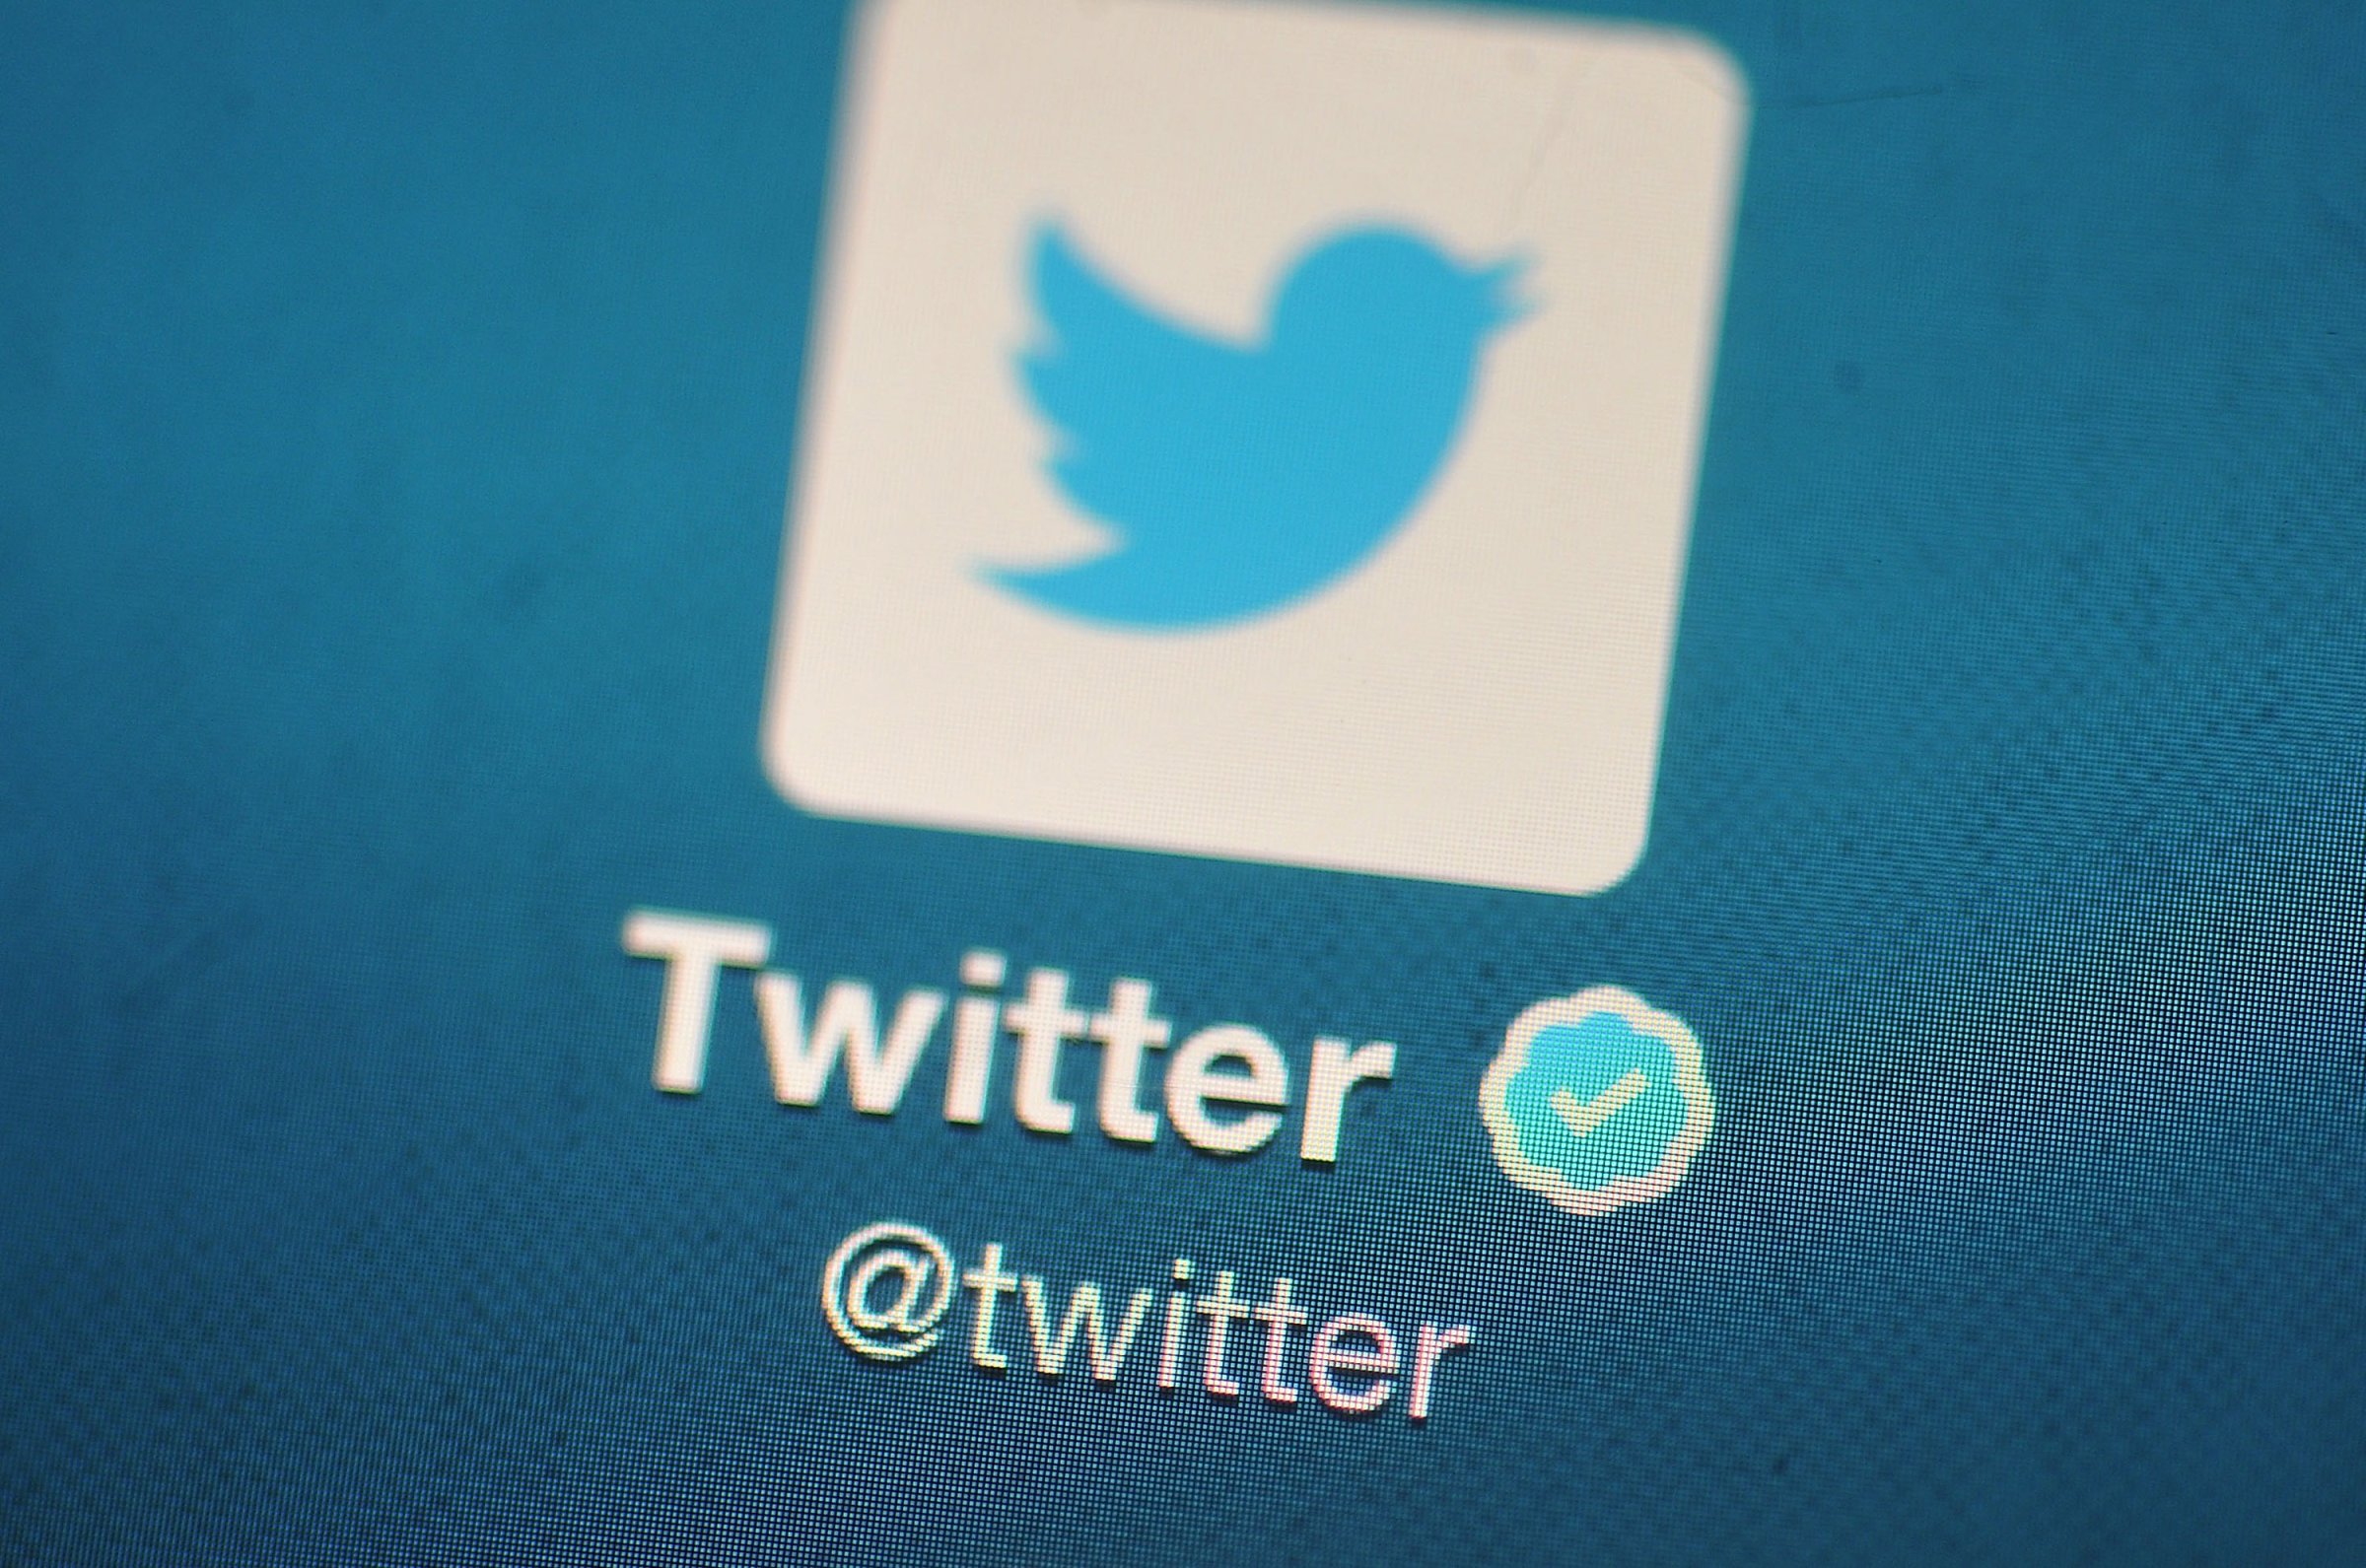 The Twitter logo displayed on a mobile device.